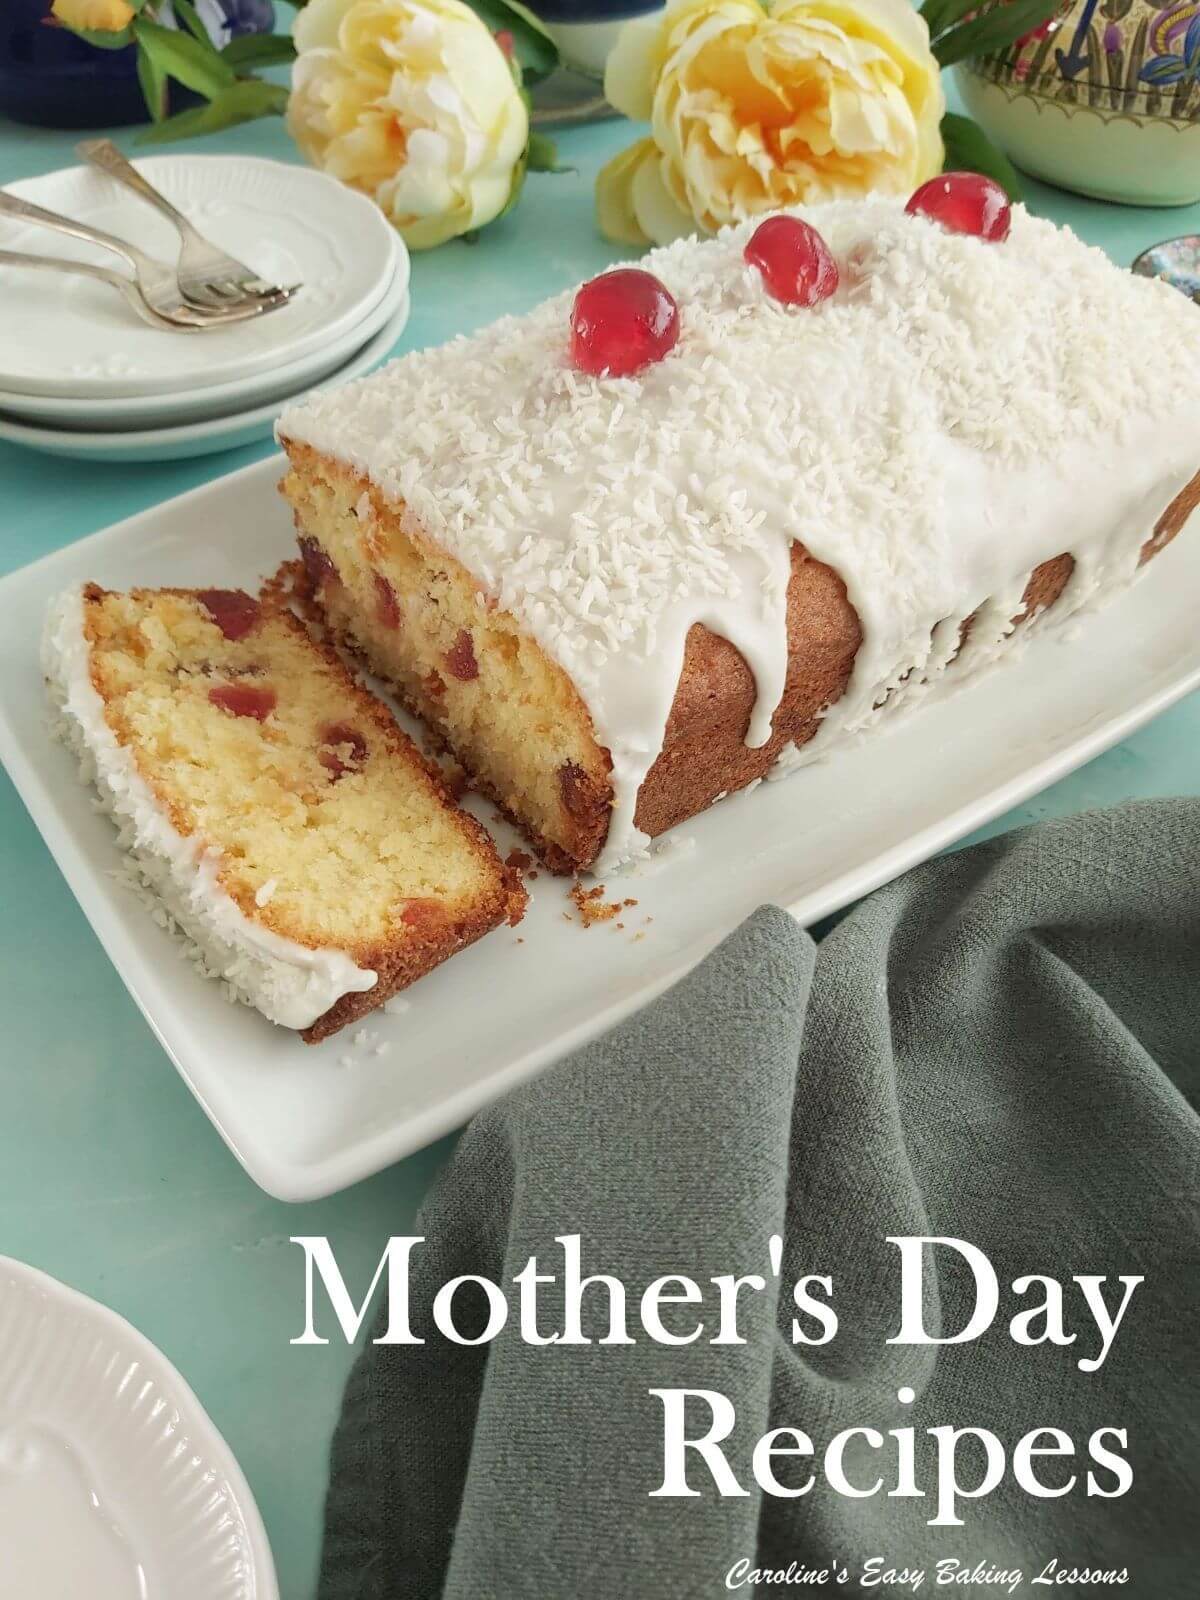 Loaf cake of coconut and cherry with one slice off, and title Mother's Day recipes.